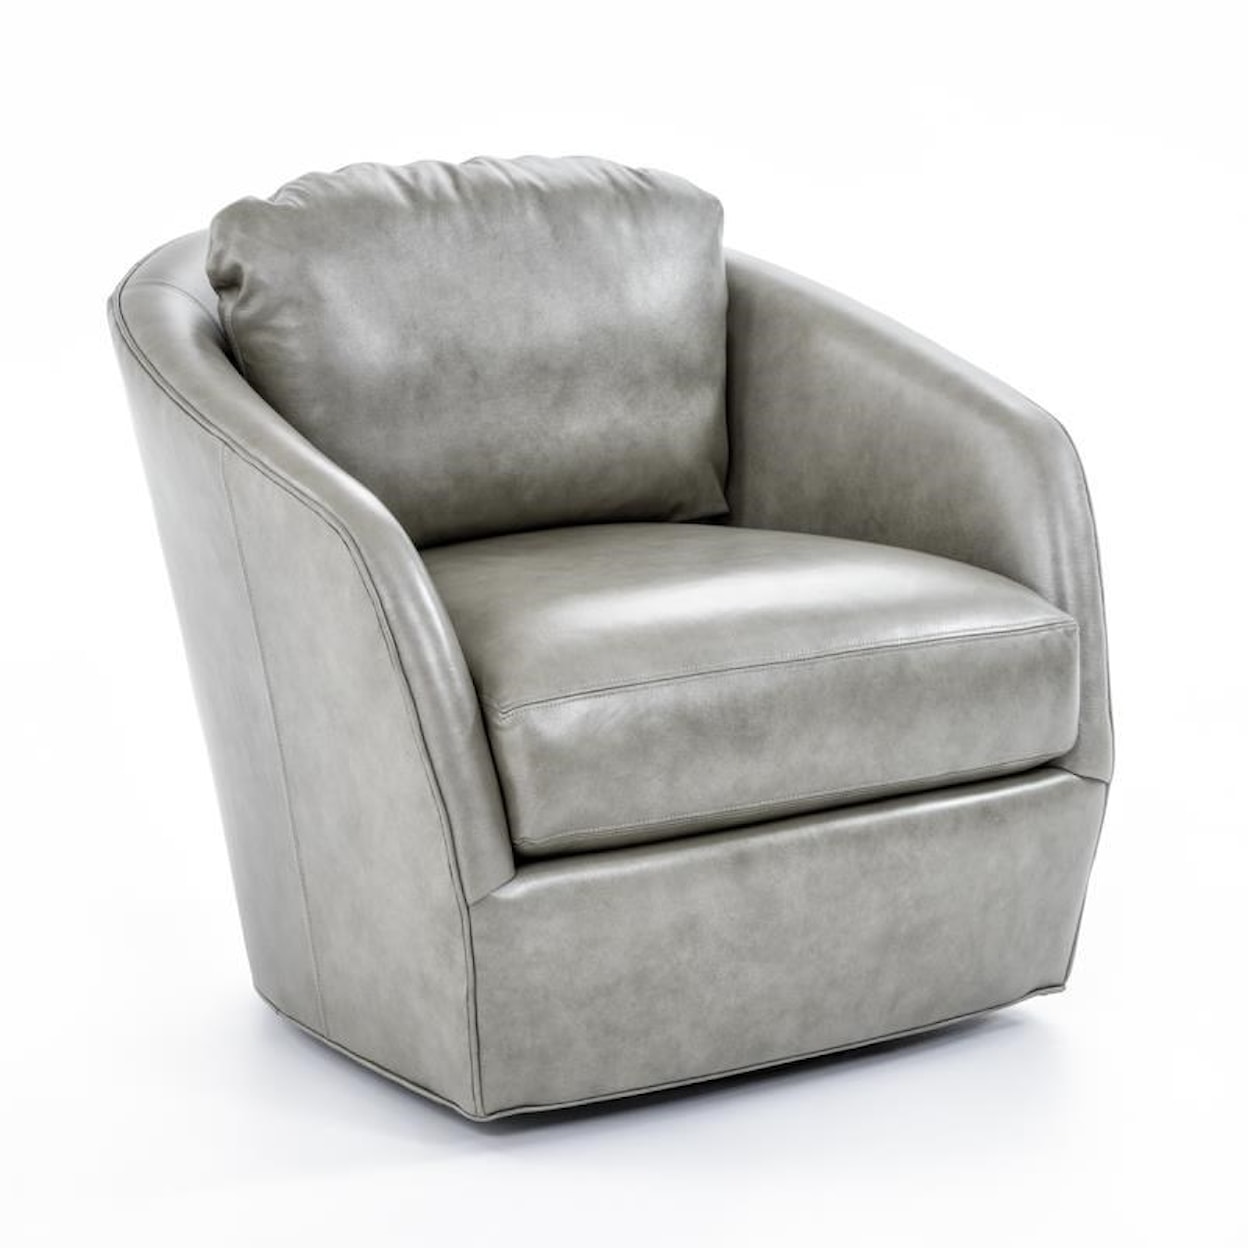 Precedent Accent Chairs Swivel Chair